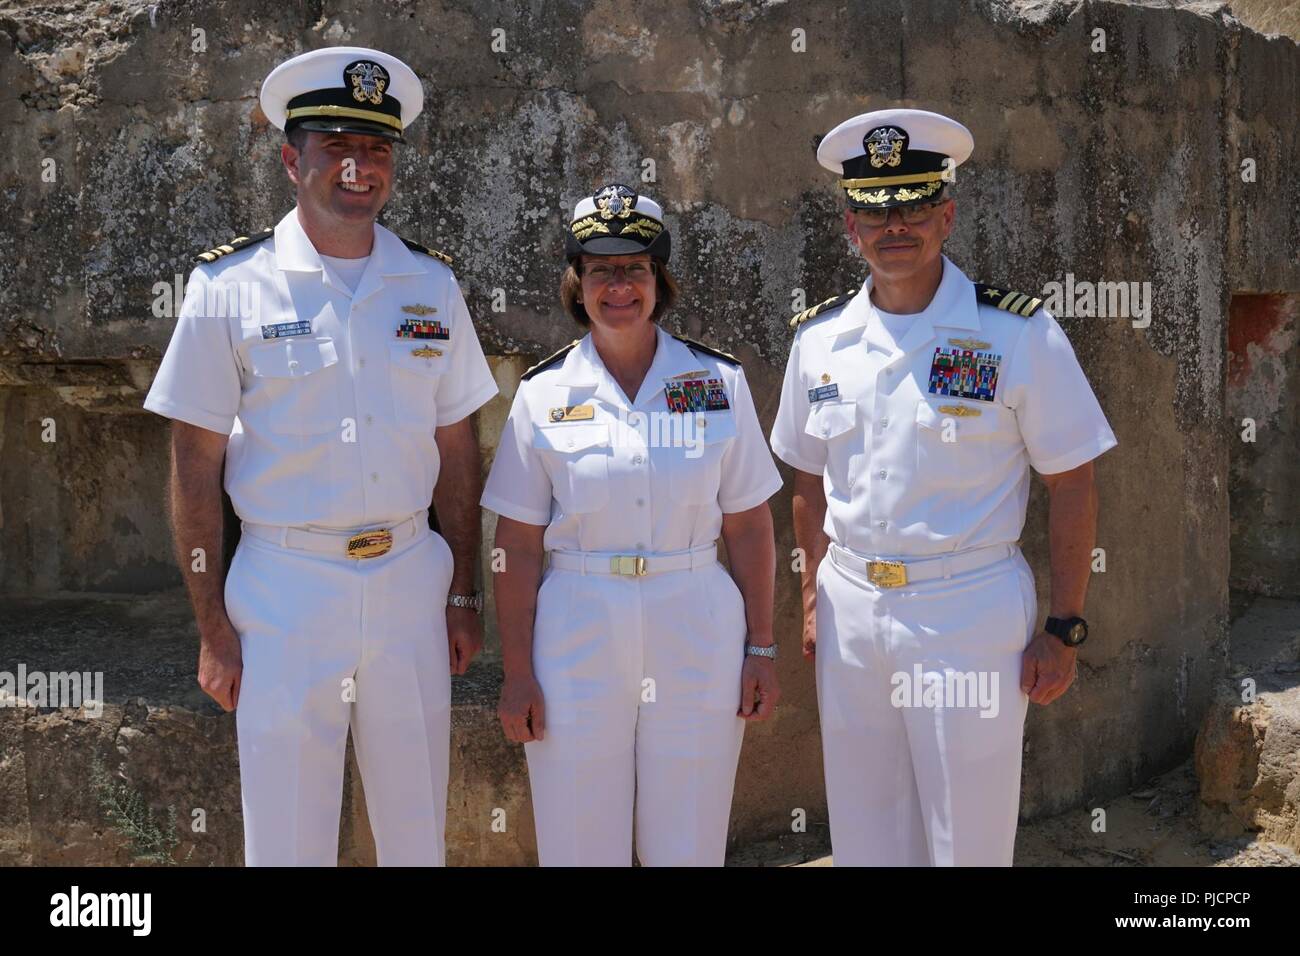 Commander, U.S. 6th Fleet, Vice Admiral Lisa M. Franchetti joins Naval Computer and Telecommunications Station Commanding Officer, Commander Manny Cordero, and Executive Officer, Lieutenant Commander James A. Scianna, for the 75th anniversary of the commencement of Operation Husky and the battle of Ponte Dirillo. Stock Photo